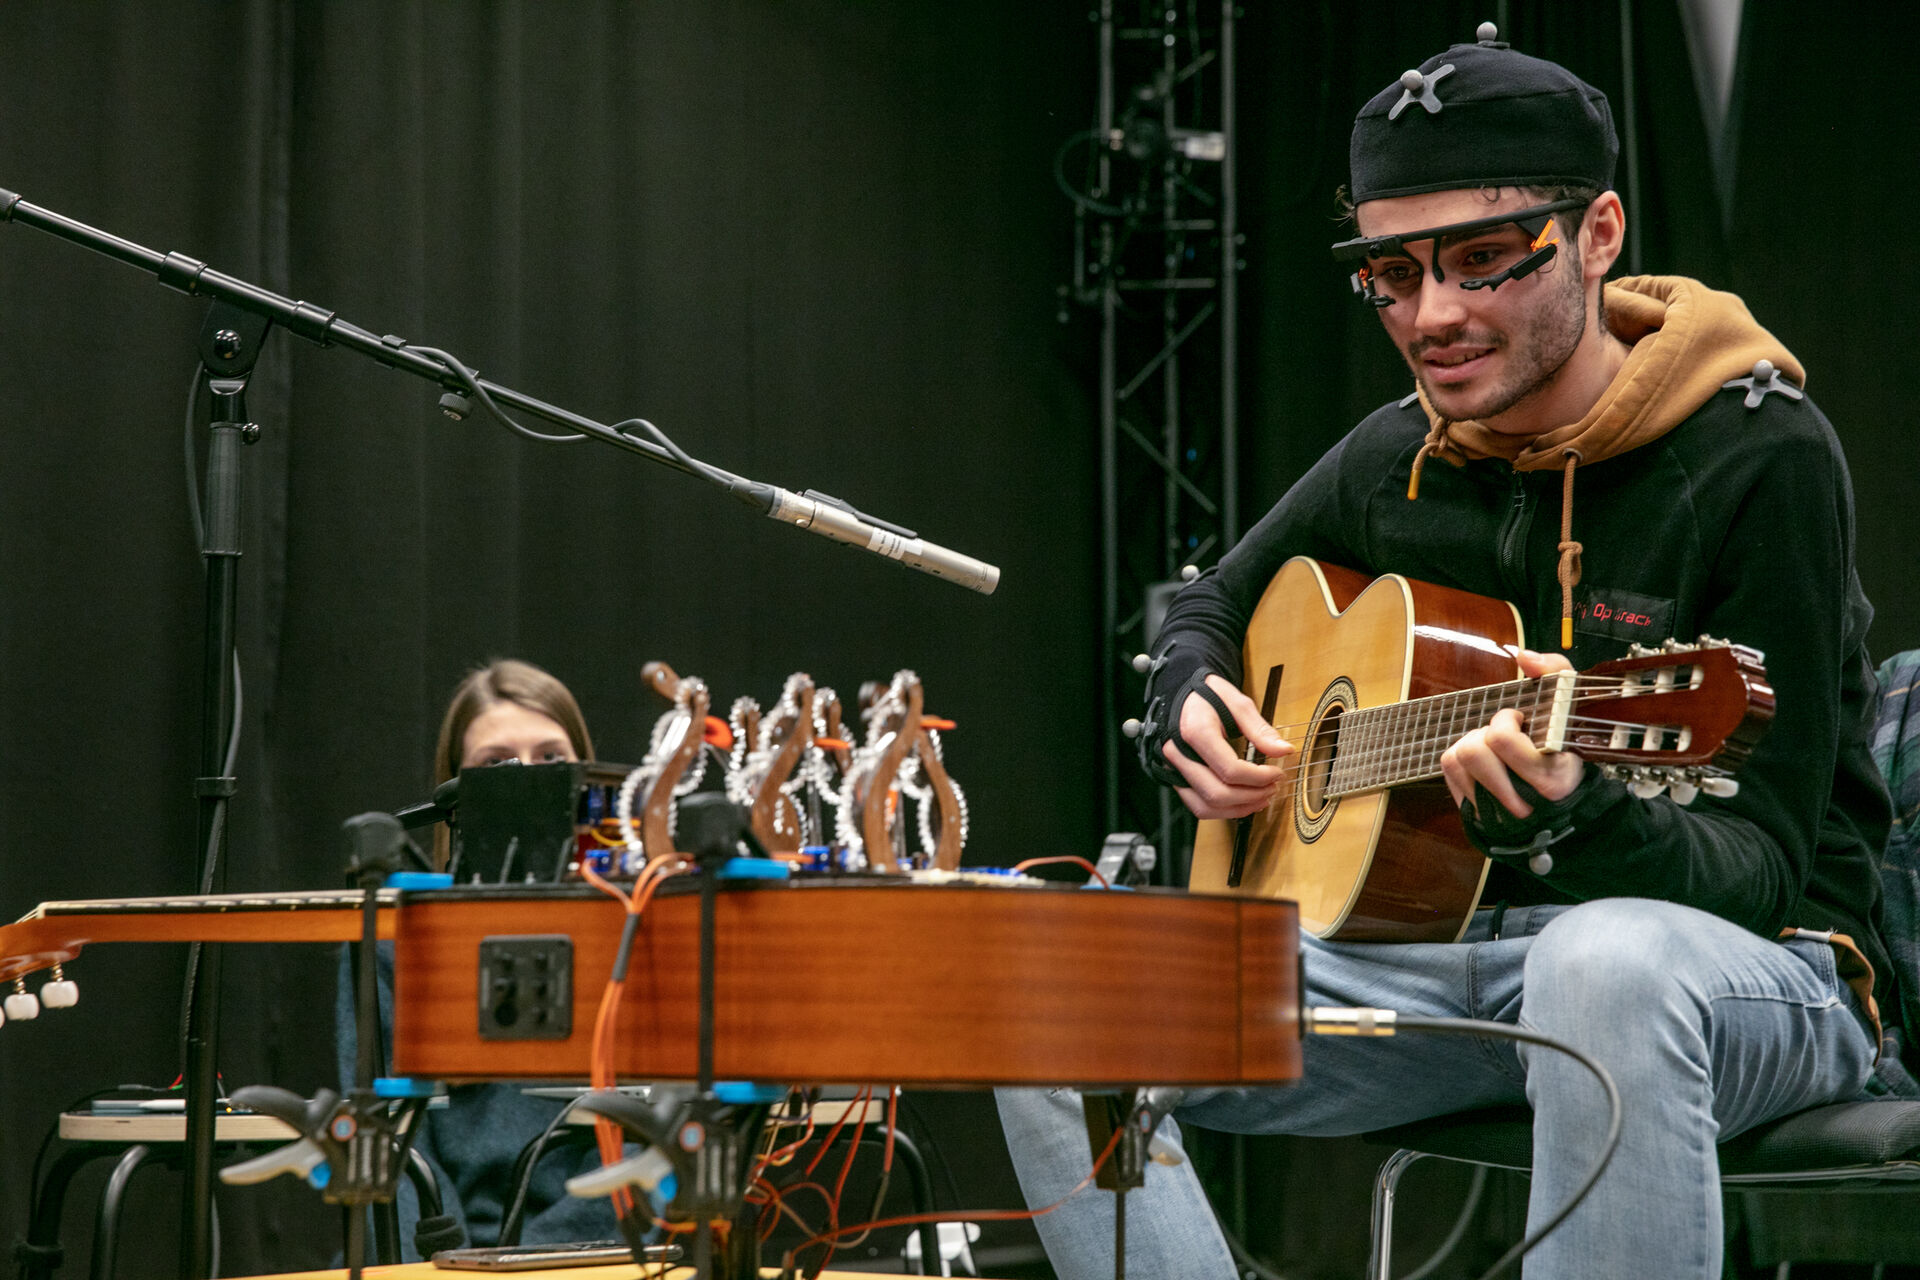 A human guitarist with eye-tracking glasses and motion-capture suit improvising a duet with Professor Plucky as part of a user study.